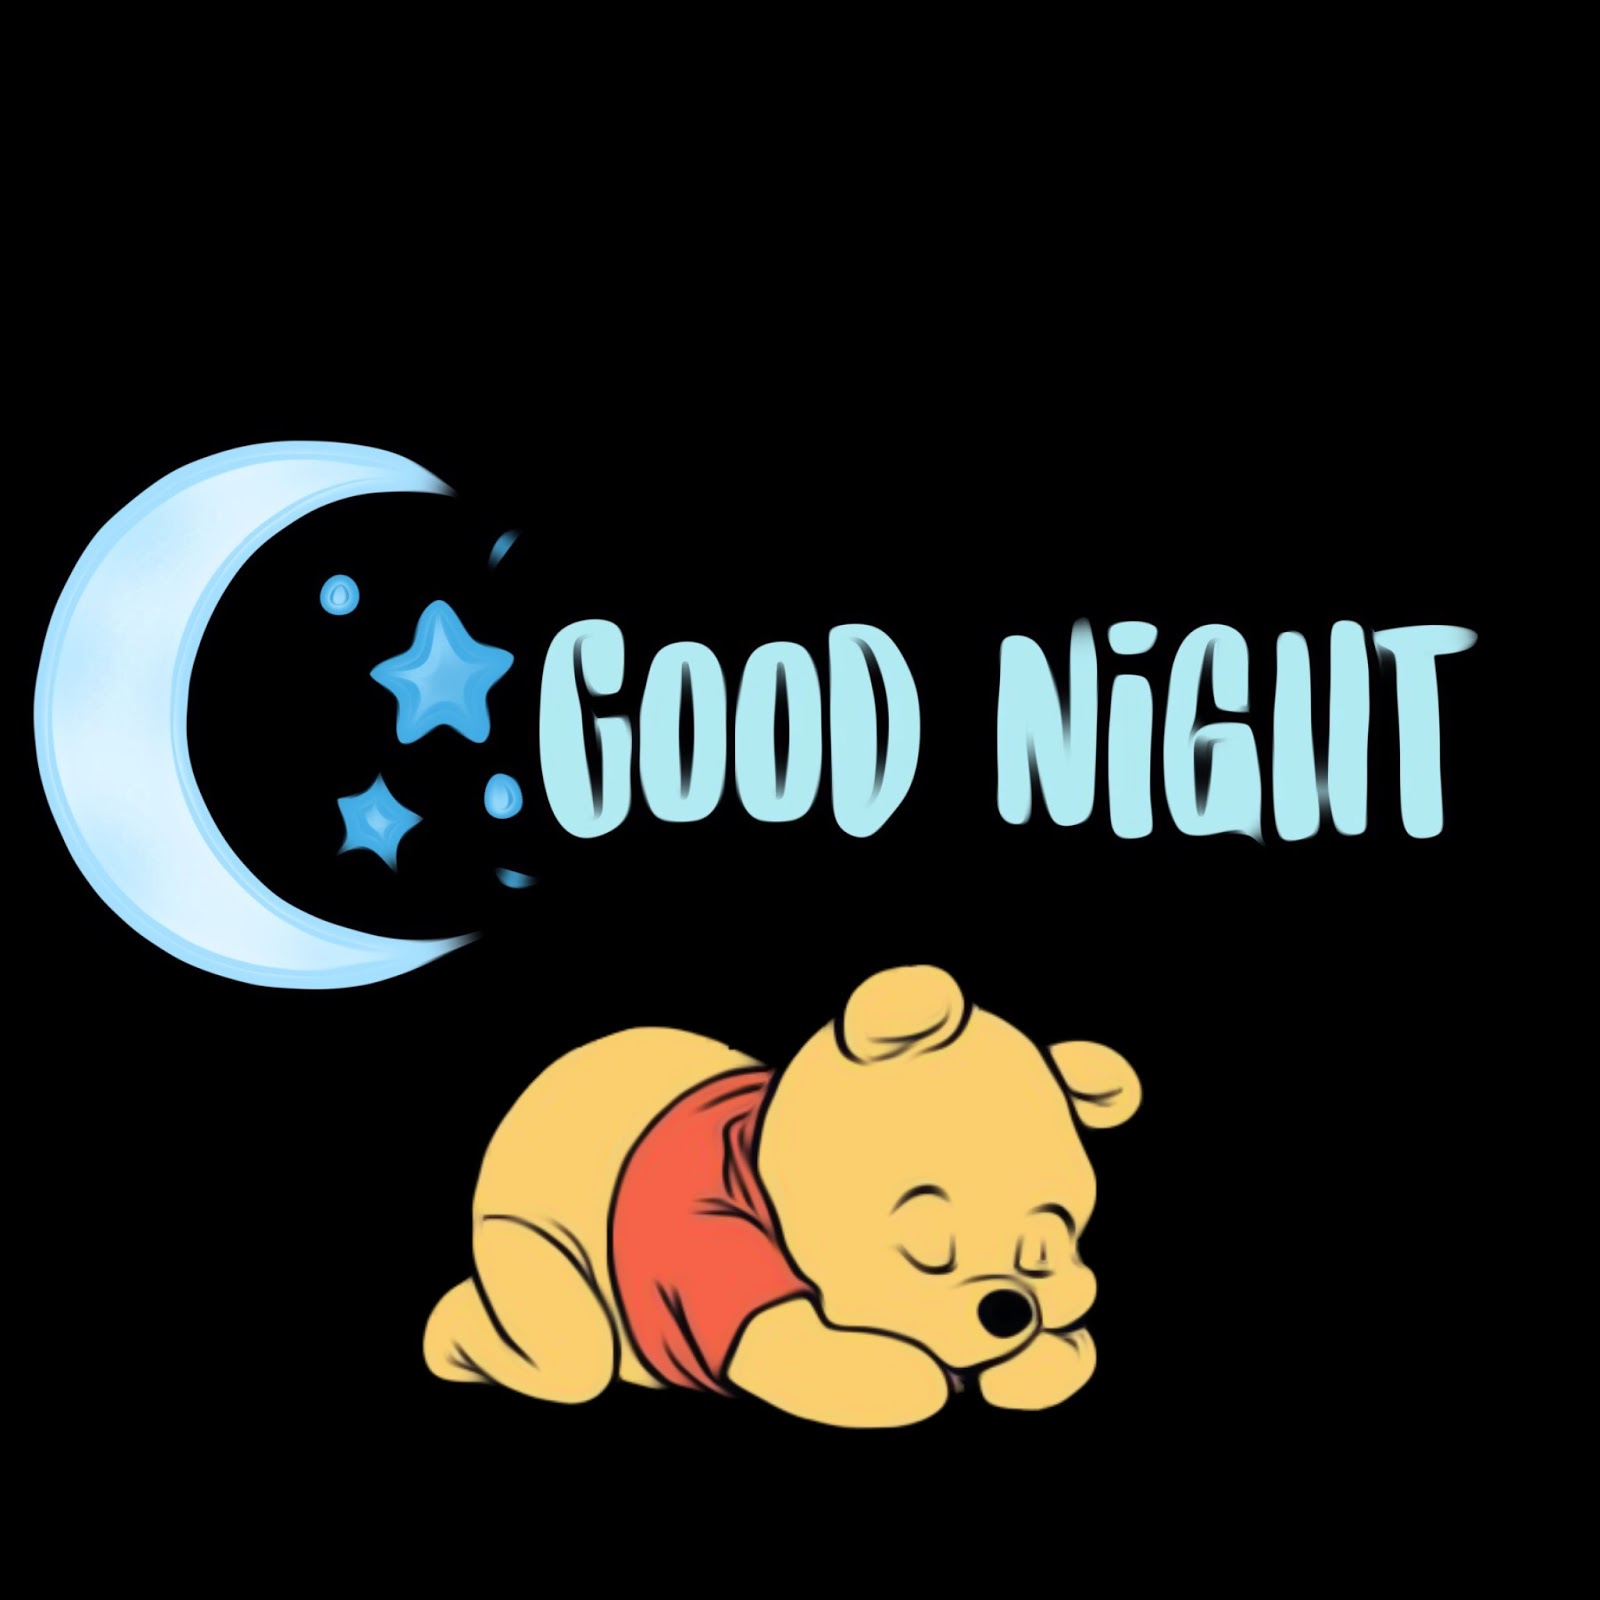 Good night Images for WhatsApp Free download hd